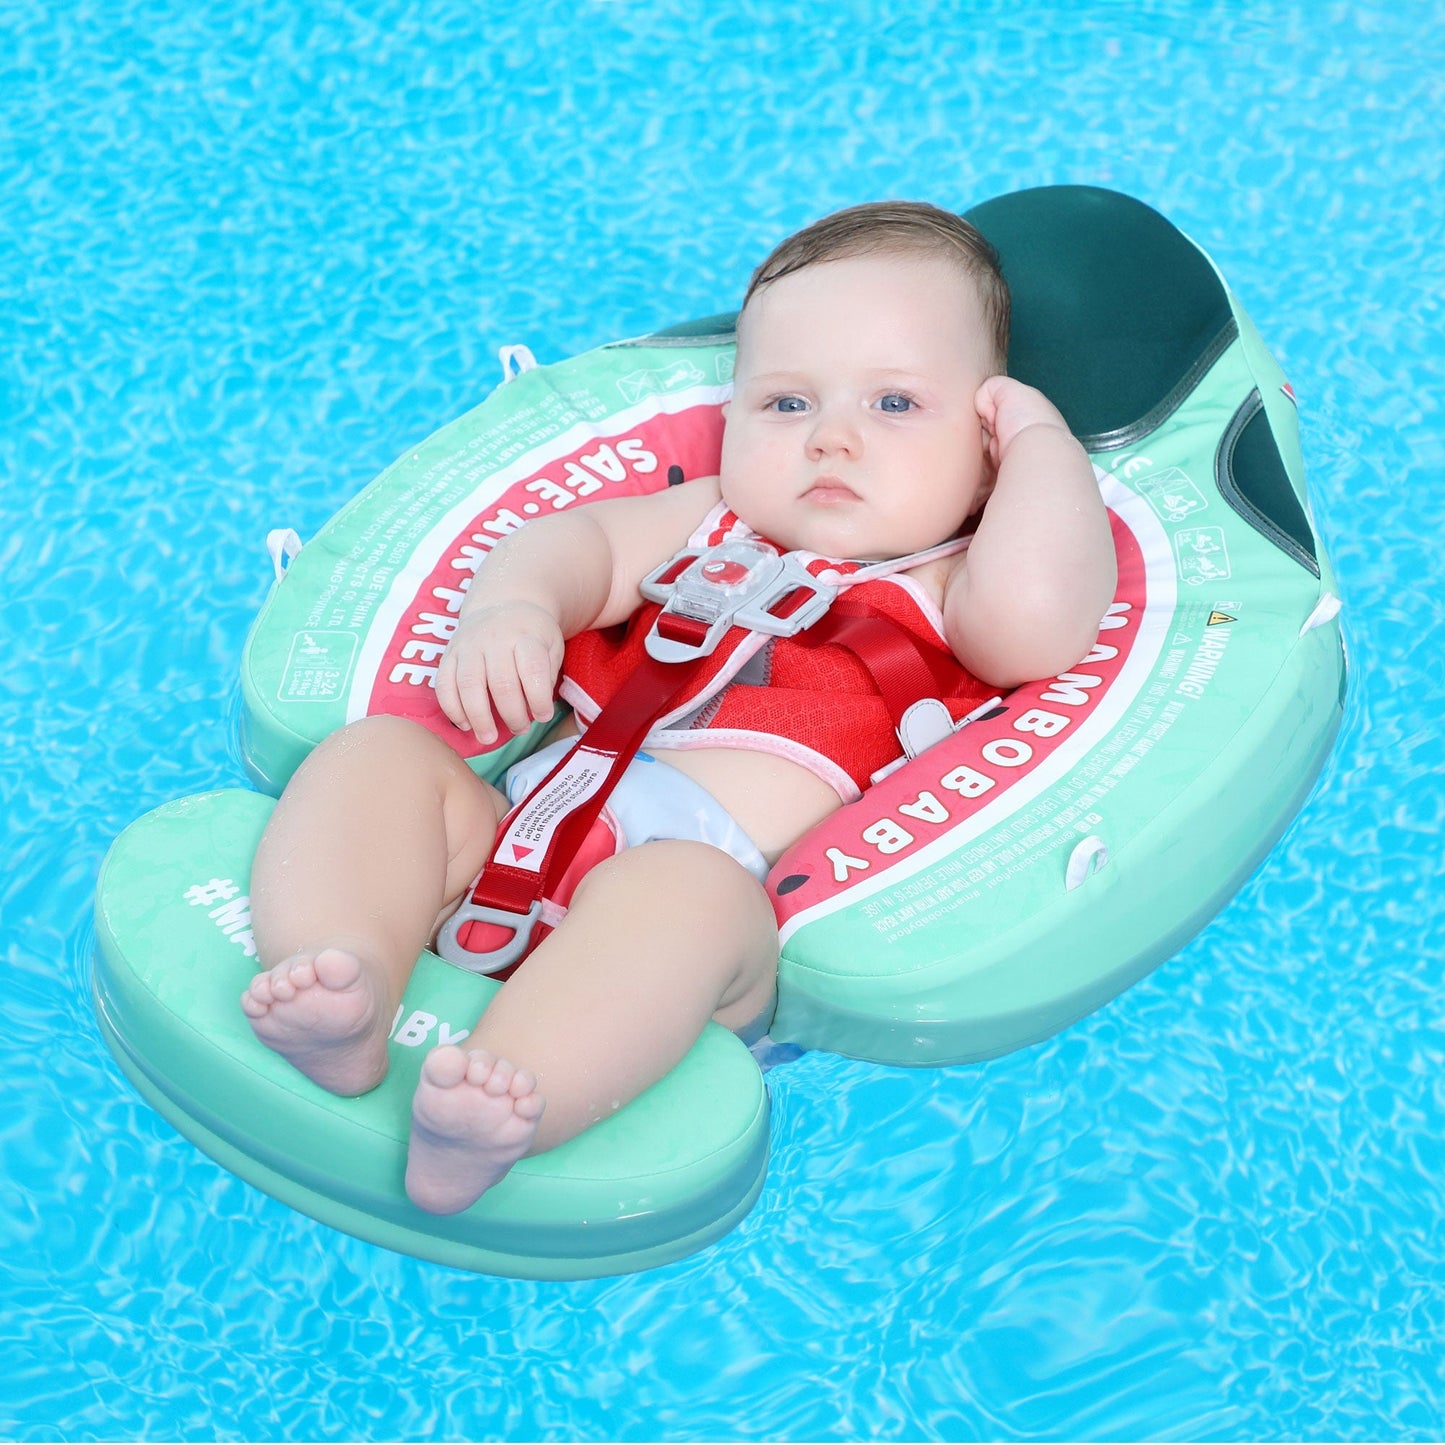 Mambobaby Swimming Ring with Sun Canopy Watermelon Green